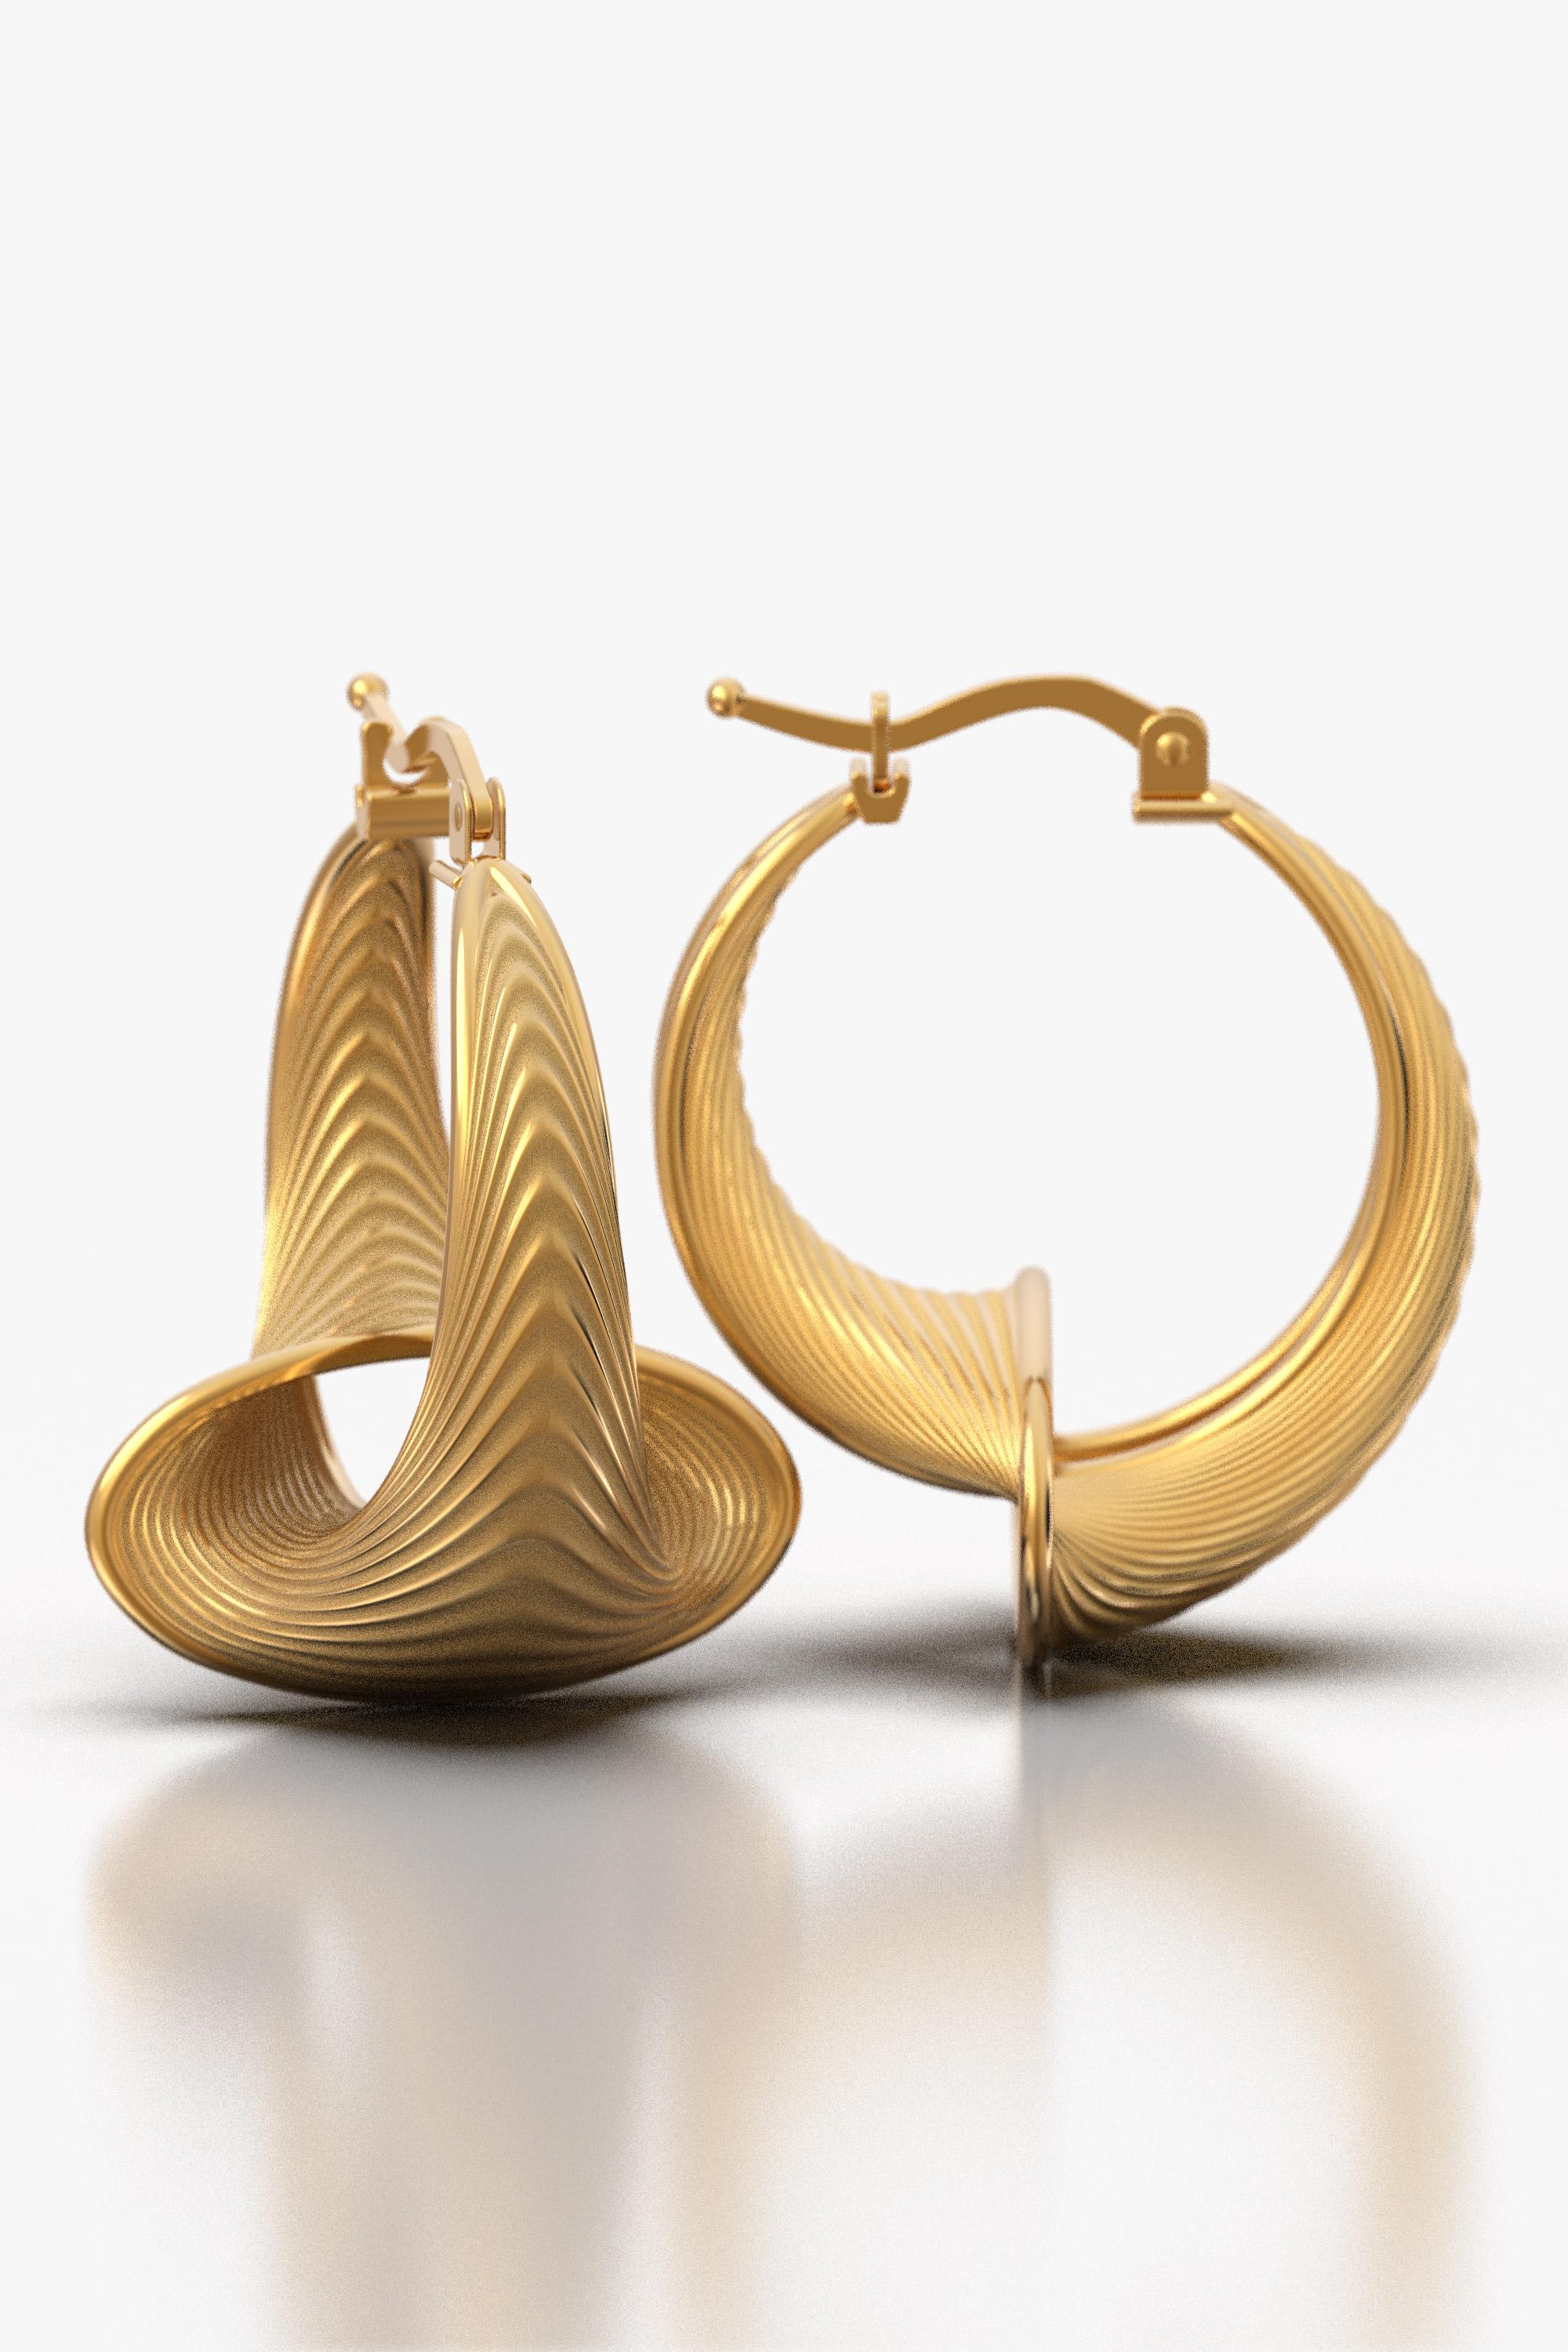 Women's Made to Order Hoop Earrings Made in Italy by Oltremare Gioielli in 18k Gold.  For Sale